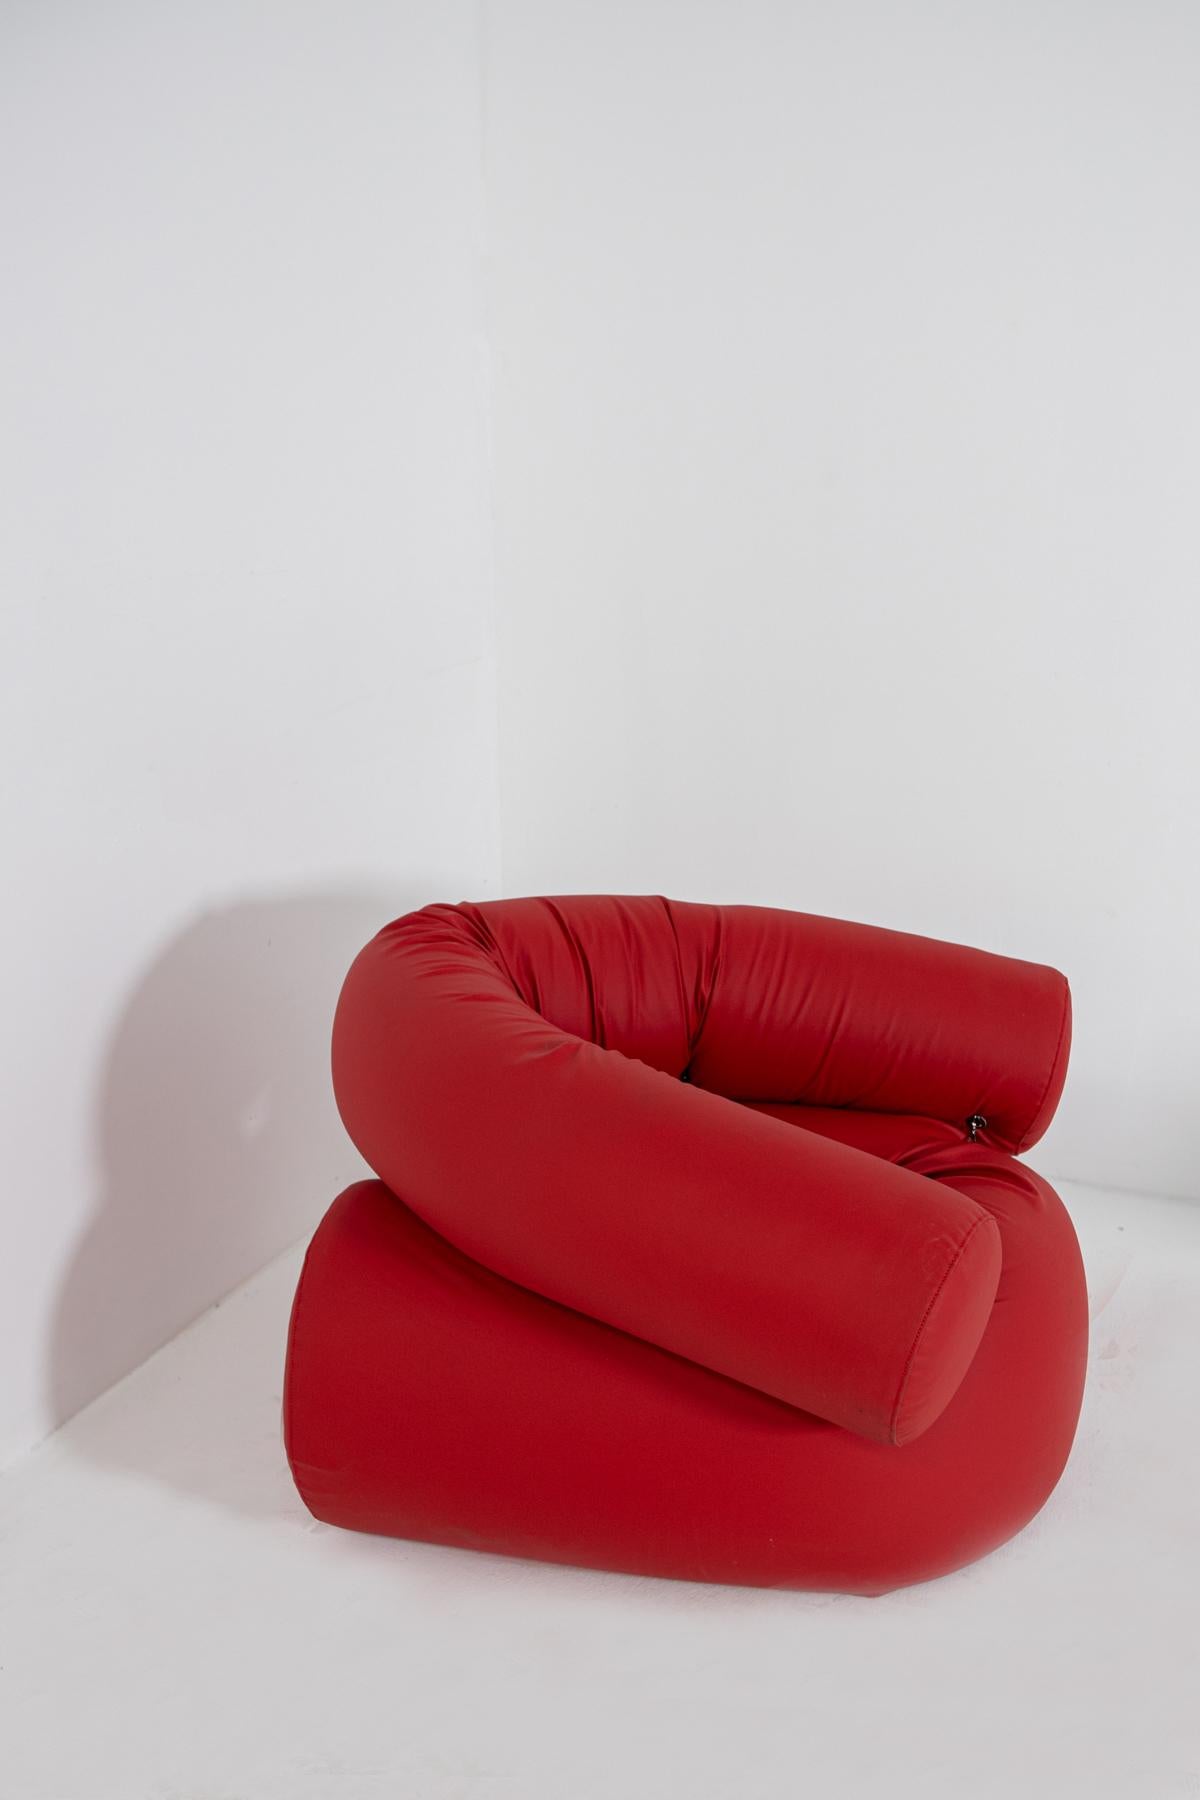 Contemporary Italian Armchair by Giovanni Grismondi Design, Red Leather, 2020 For Sale 4